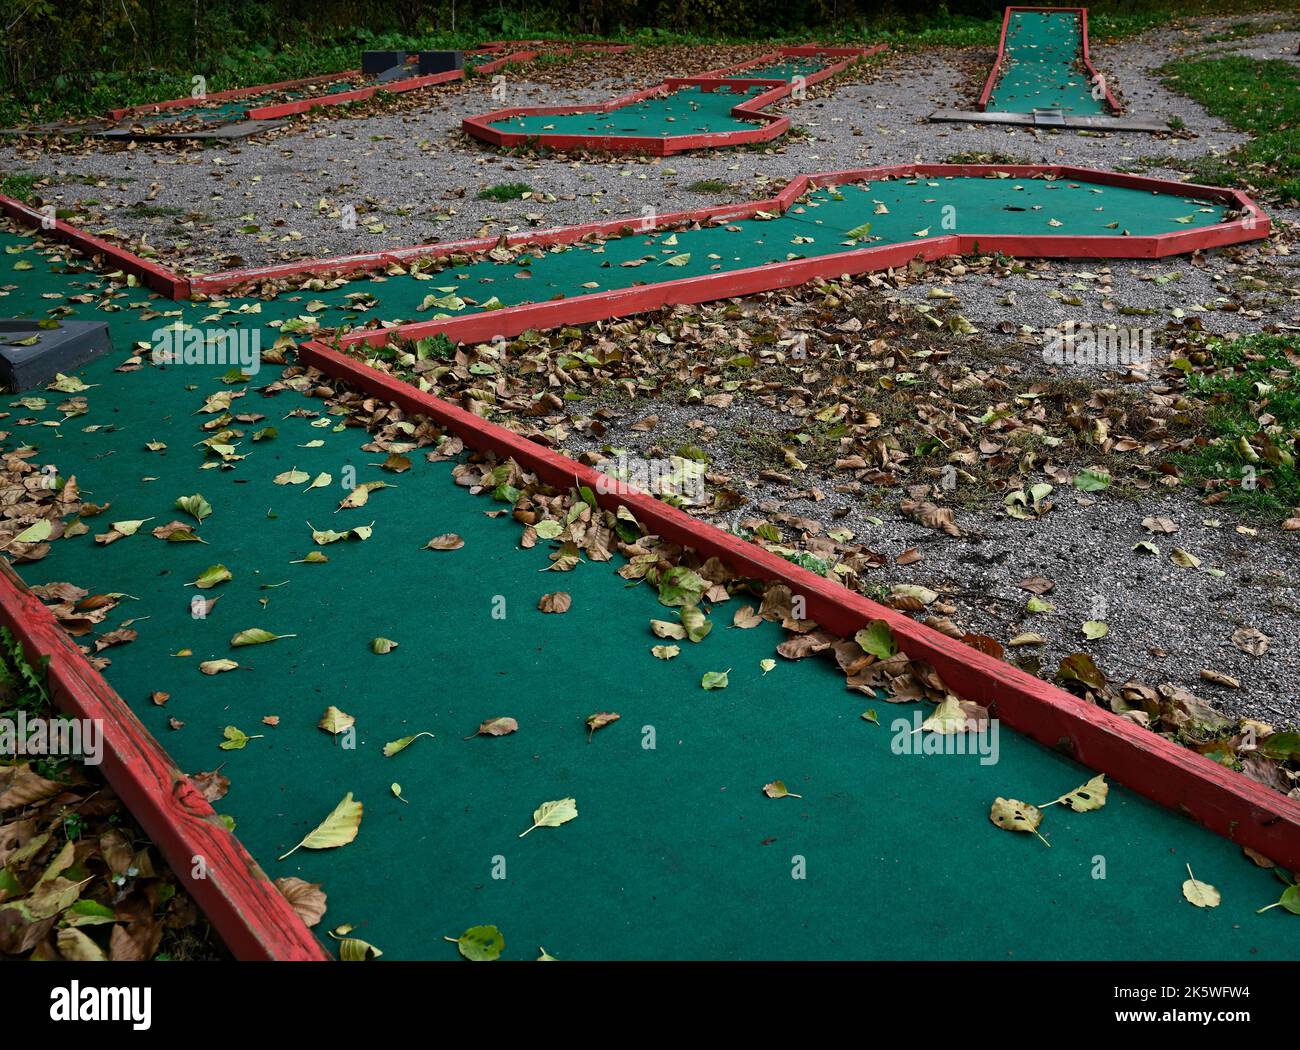 mini golf course in autumn covered with yellow leaves Stock Photo